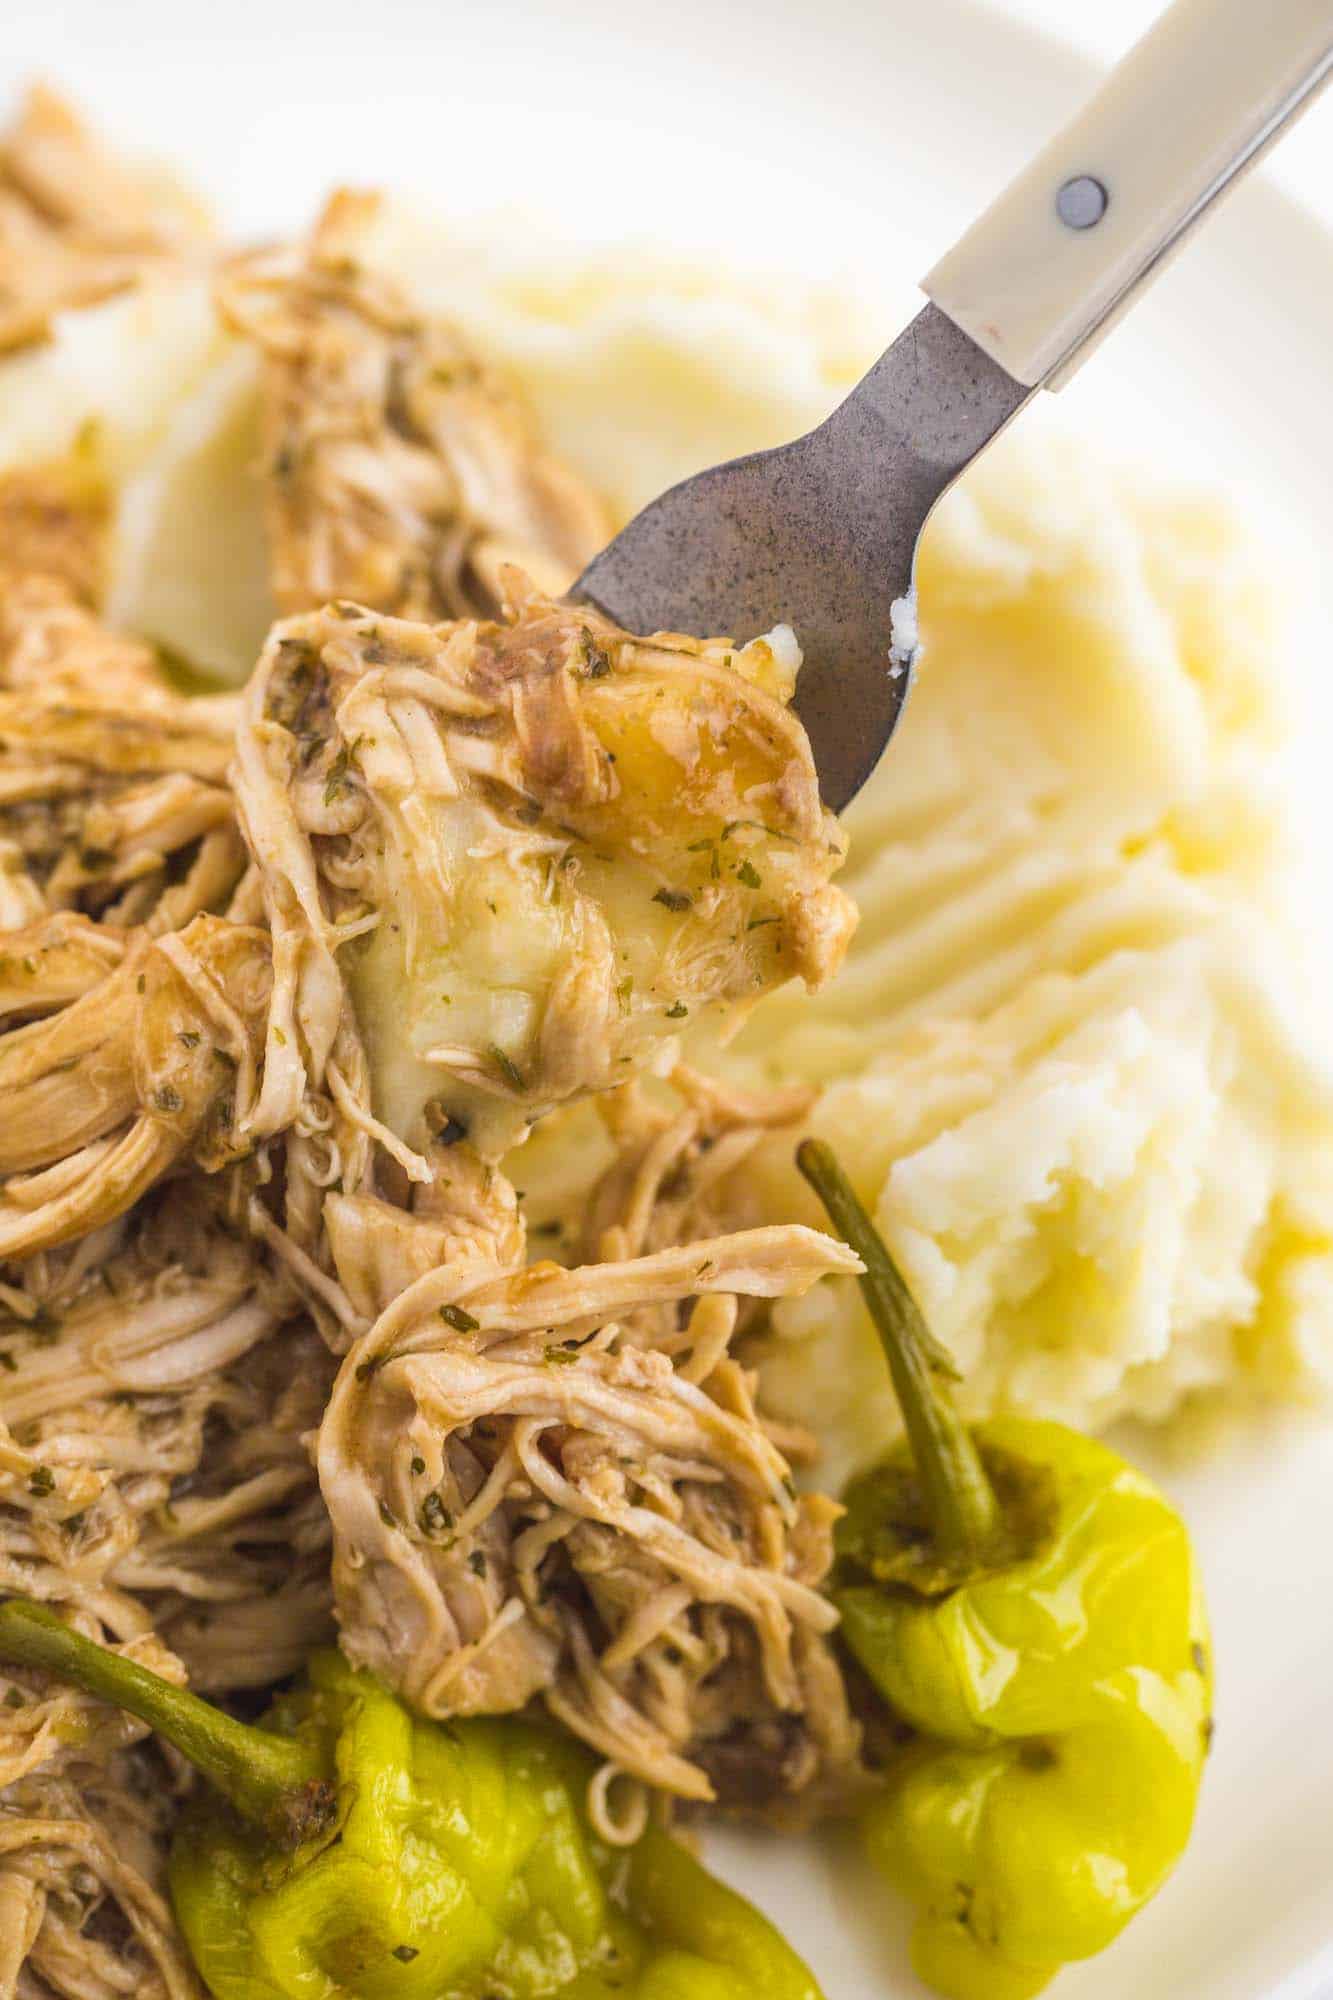 closeup view of a fork picking up a bite of shredded mississippi chicken from a plate of mashed potatoes